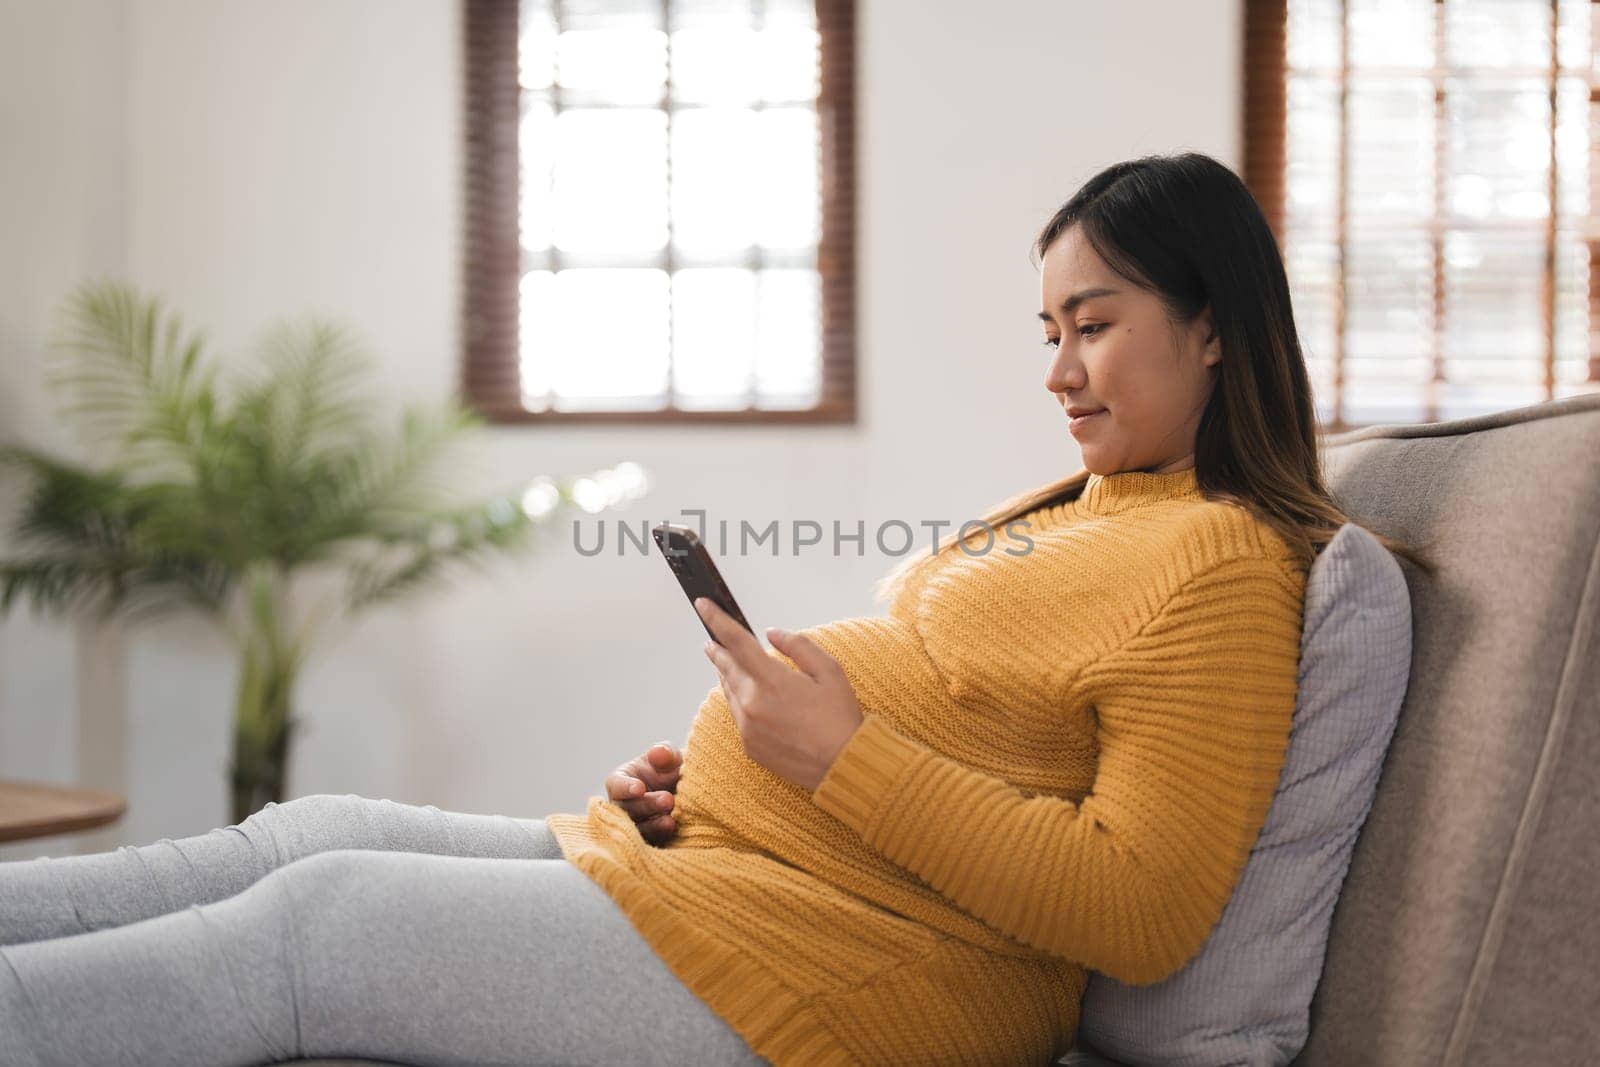 Pregnant woman sitting on a sofa in a modern living room, using a smartphone, wearing comfortable maternity clothing, with natural light and a cozy home environment.